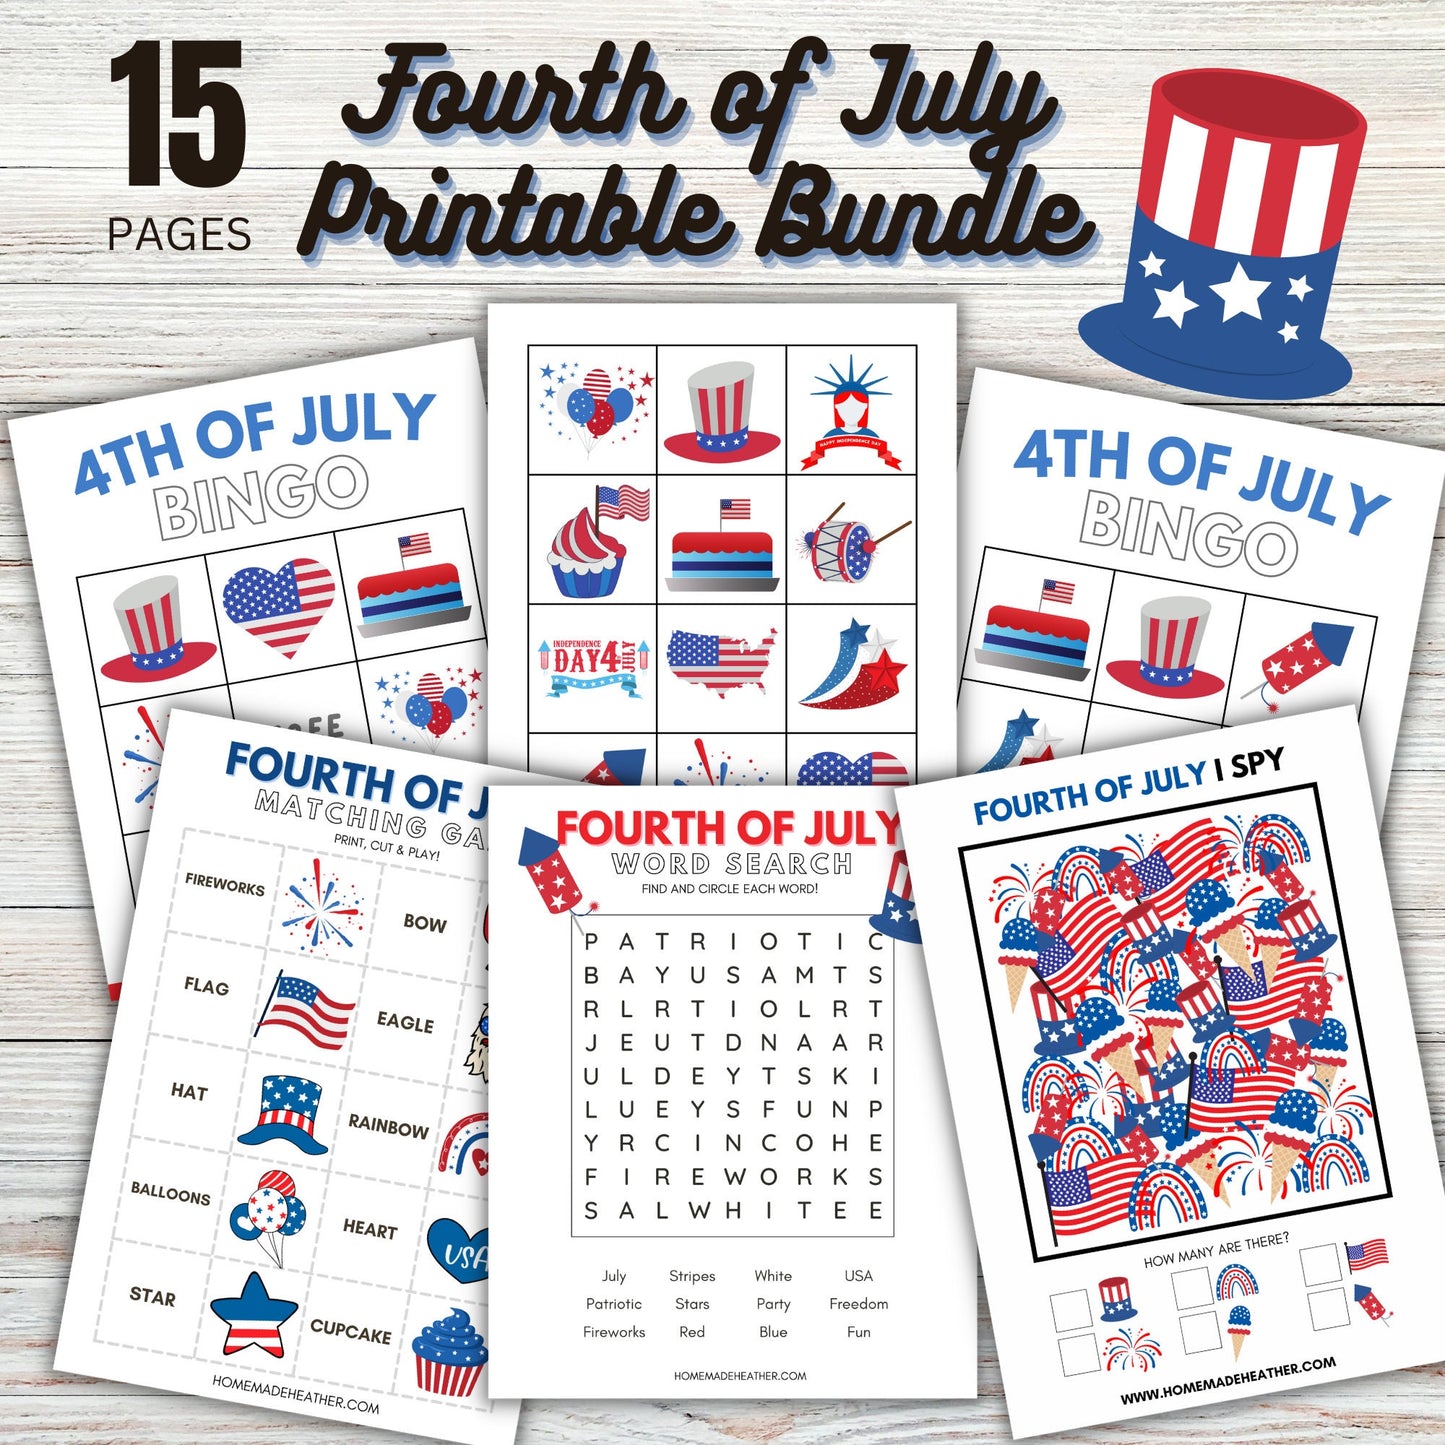 Fourth of July Printable Activity Bundle - Forth of July Printable PDF - Instant Download